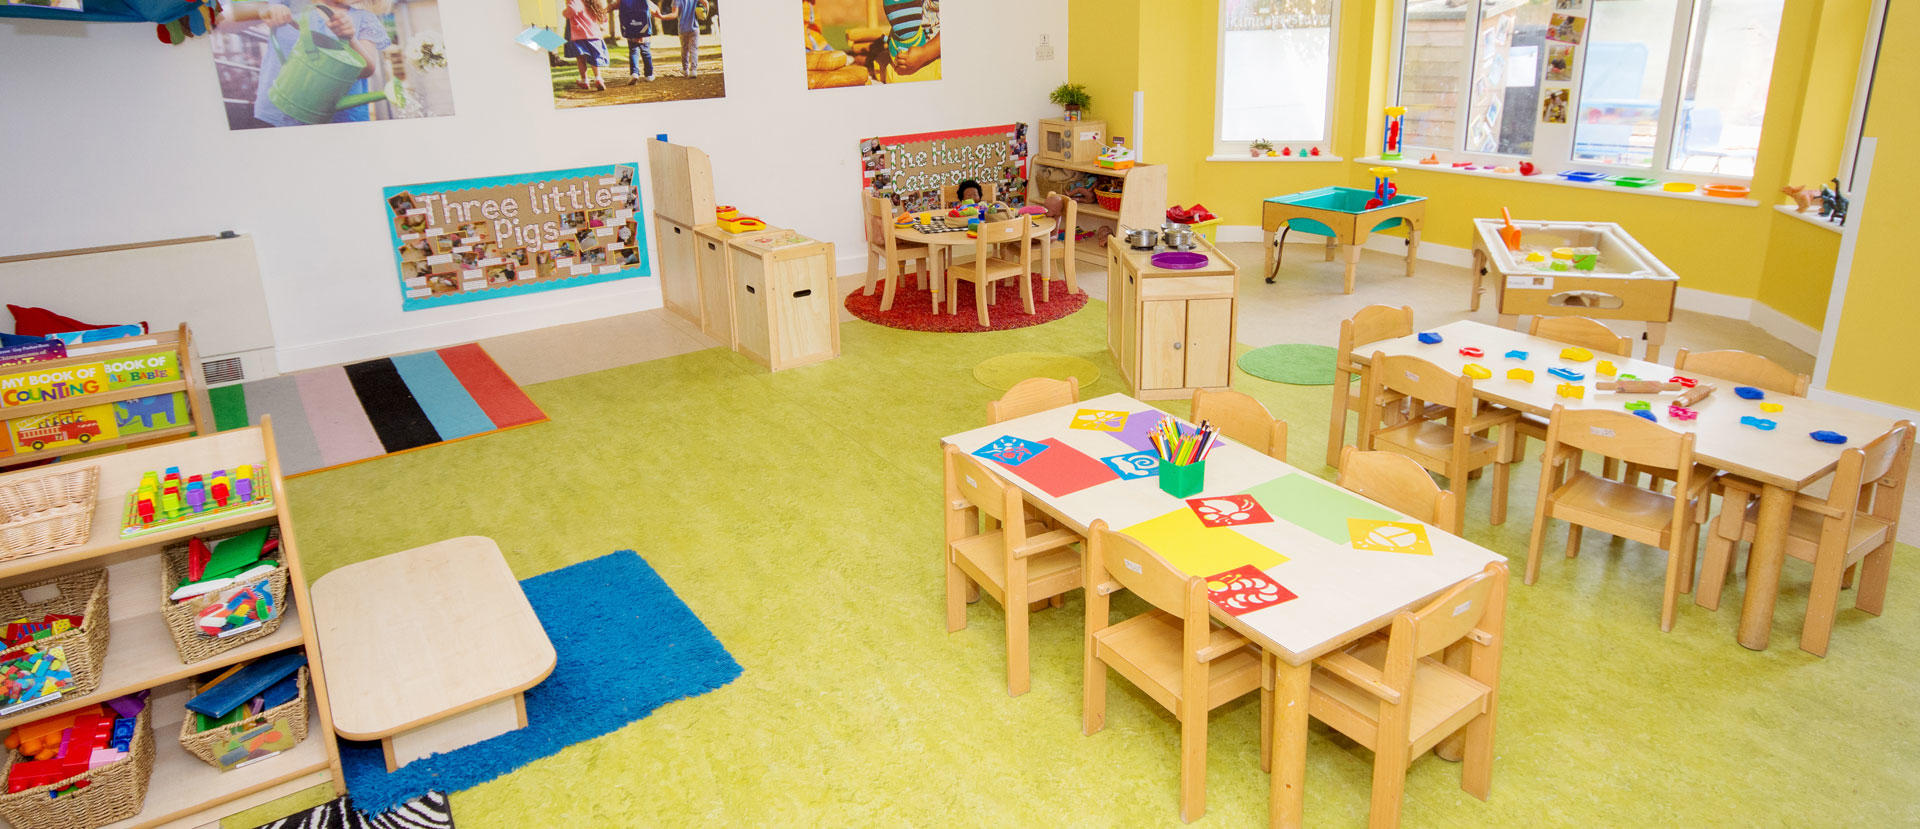 Images Bright Horizons Sale Day Nursery and Preschool